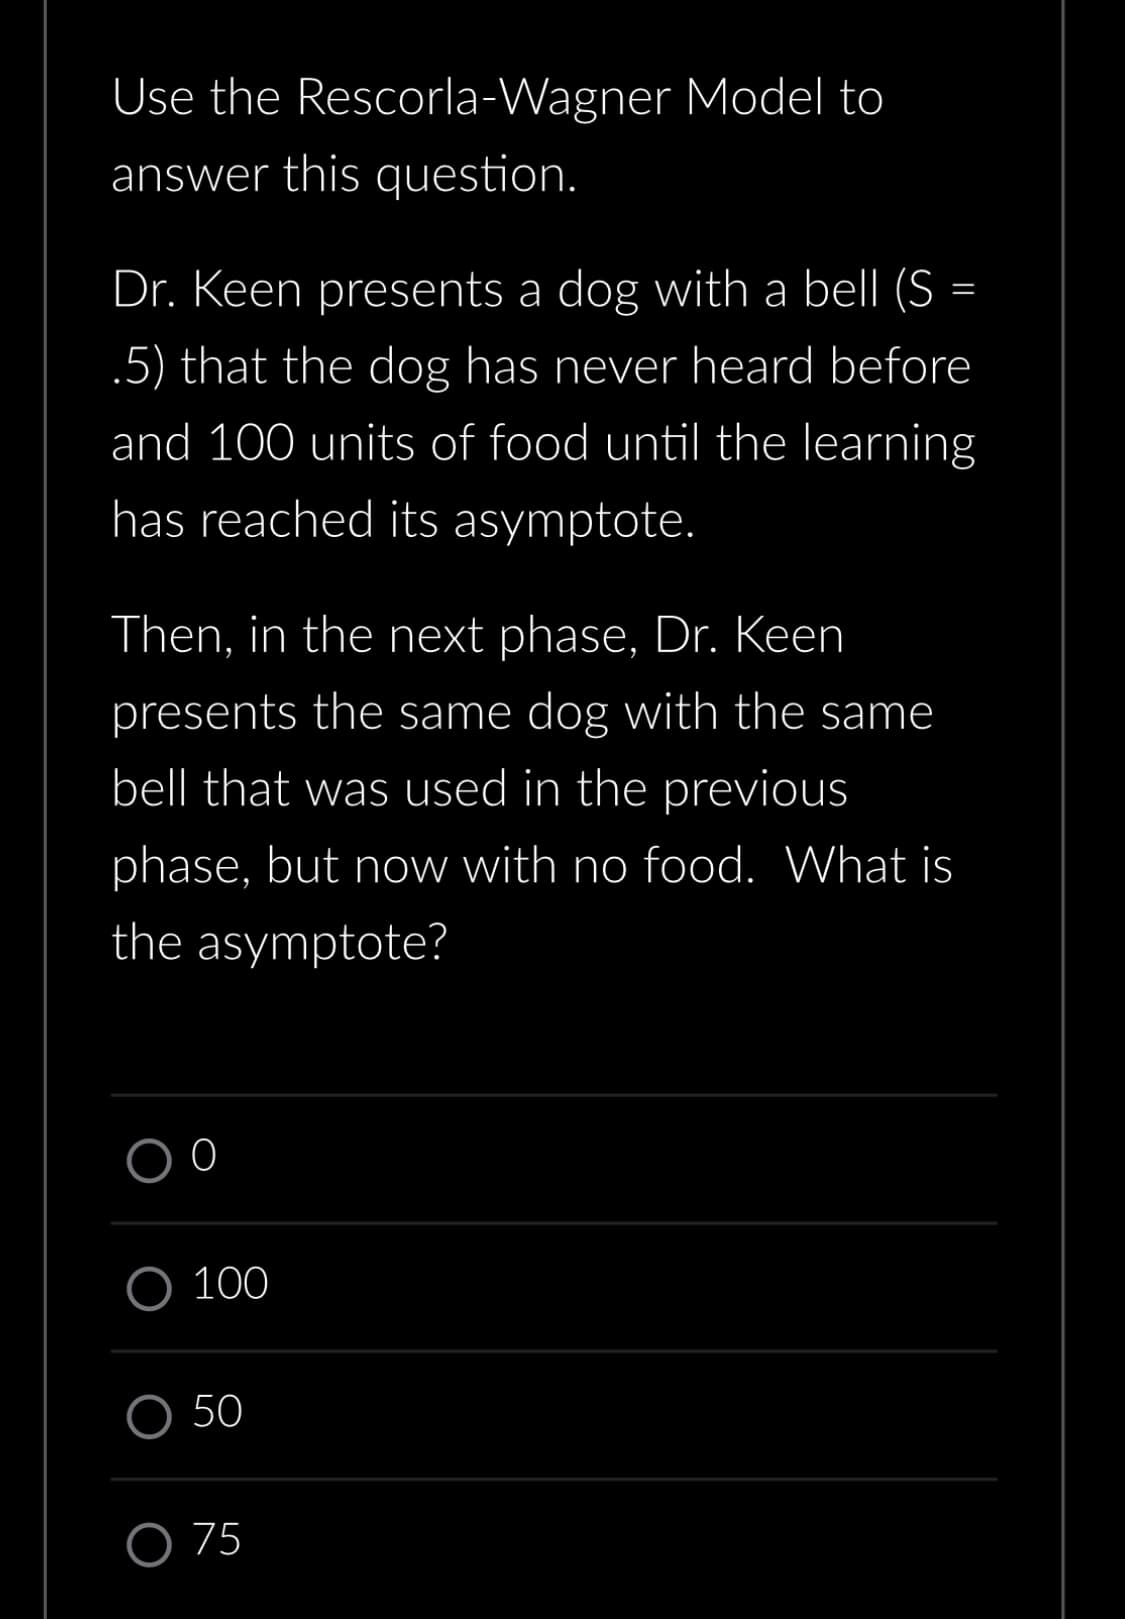 Use the
answer this question.
=
Dr. Keen presents a dog with a bell (S =
.5) that the dog has never heard before
and 100 units of food until the learning
has reached its asymptote.
Then, in the next phase, Dr. Keen
presents the same dog with the same
bell that was used in the previous
phase, but now with no food. What is
the asymptote?
0
Rescorla-Wagner Model to
O 100
O 50
O 75